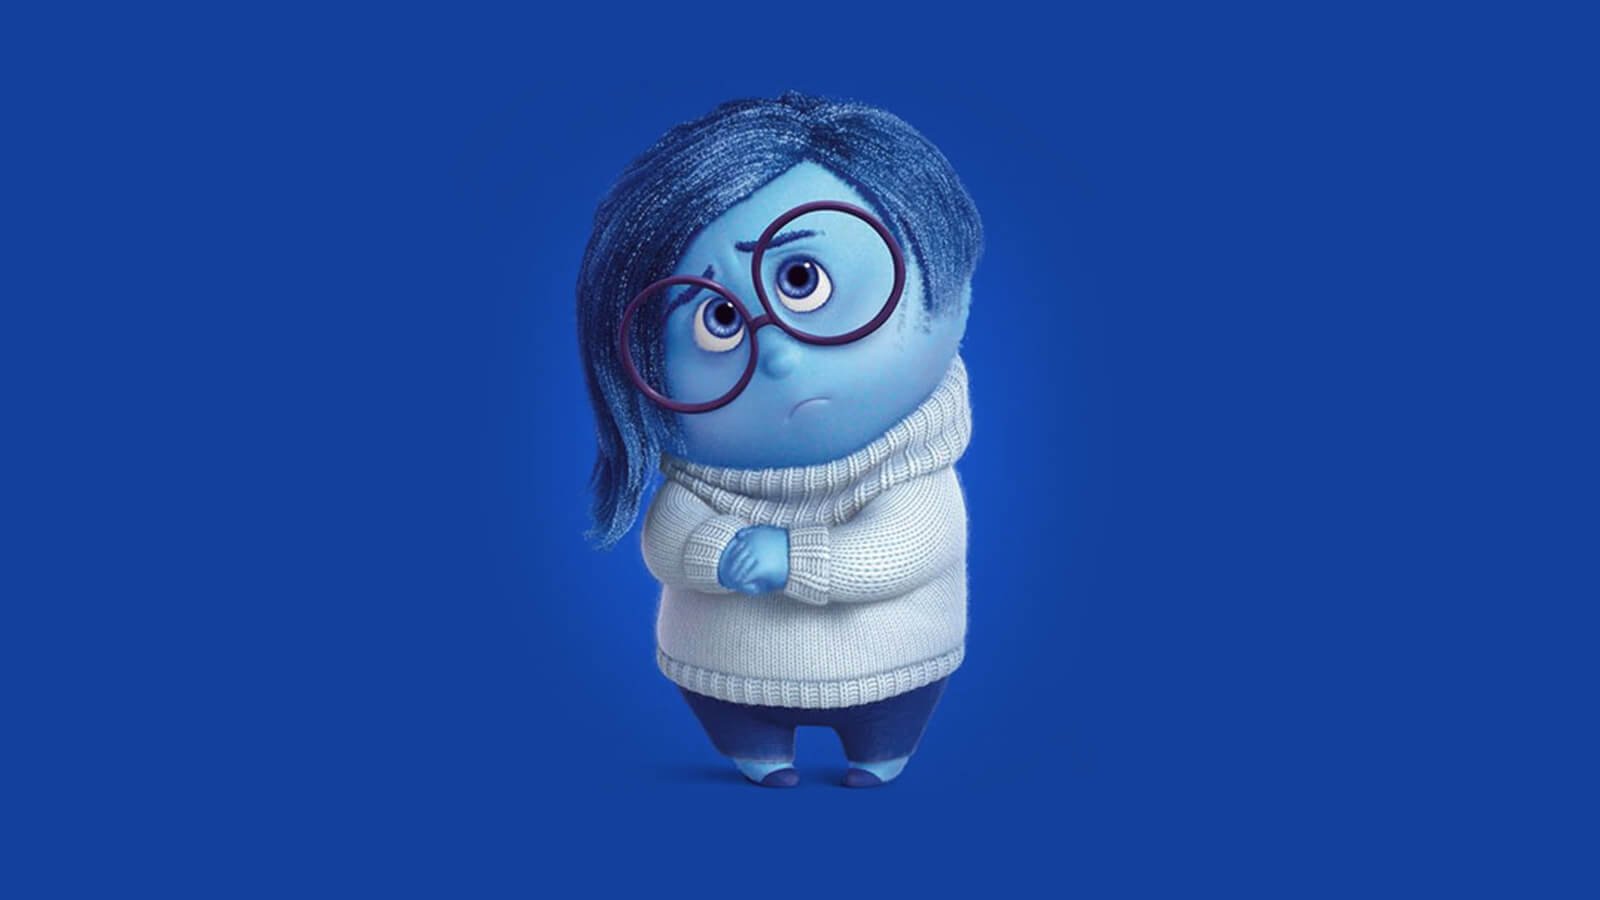 Sadness from “Inside Out”